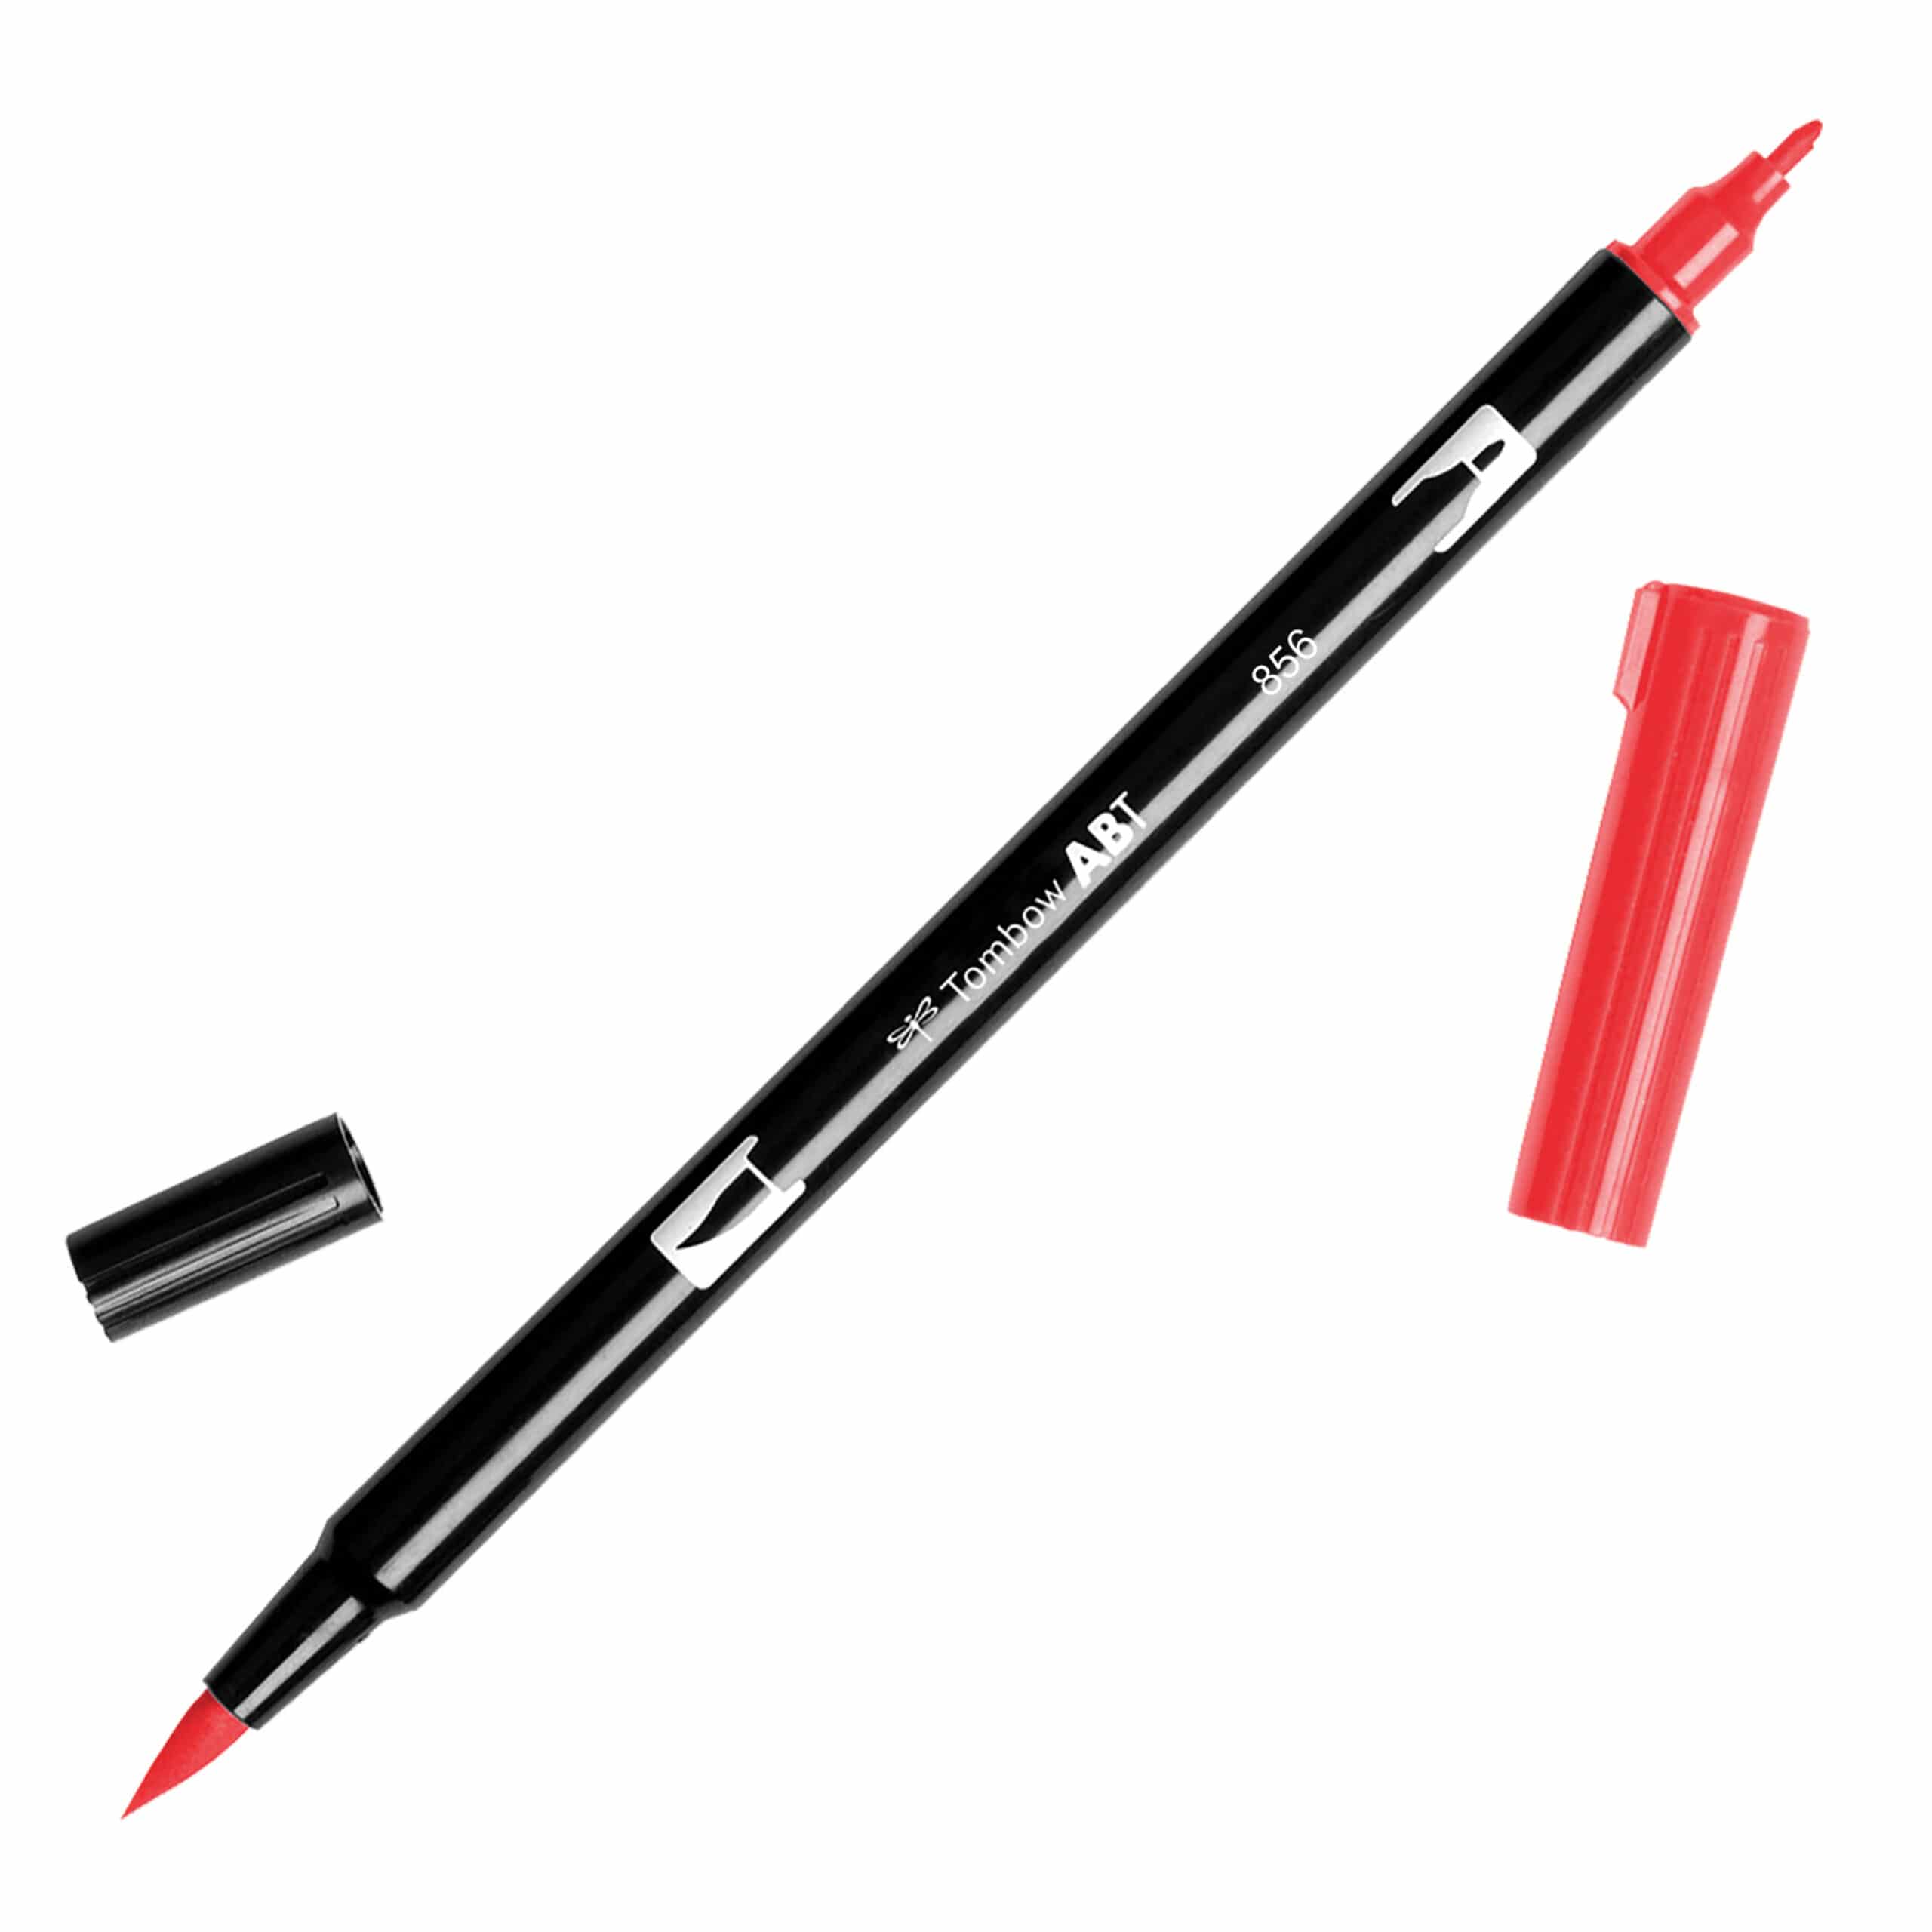 Tombow-Chiense-Red-856-scaled_ea547230-d748-484e-bb59-880d37be70e1.jpg